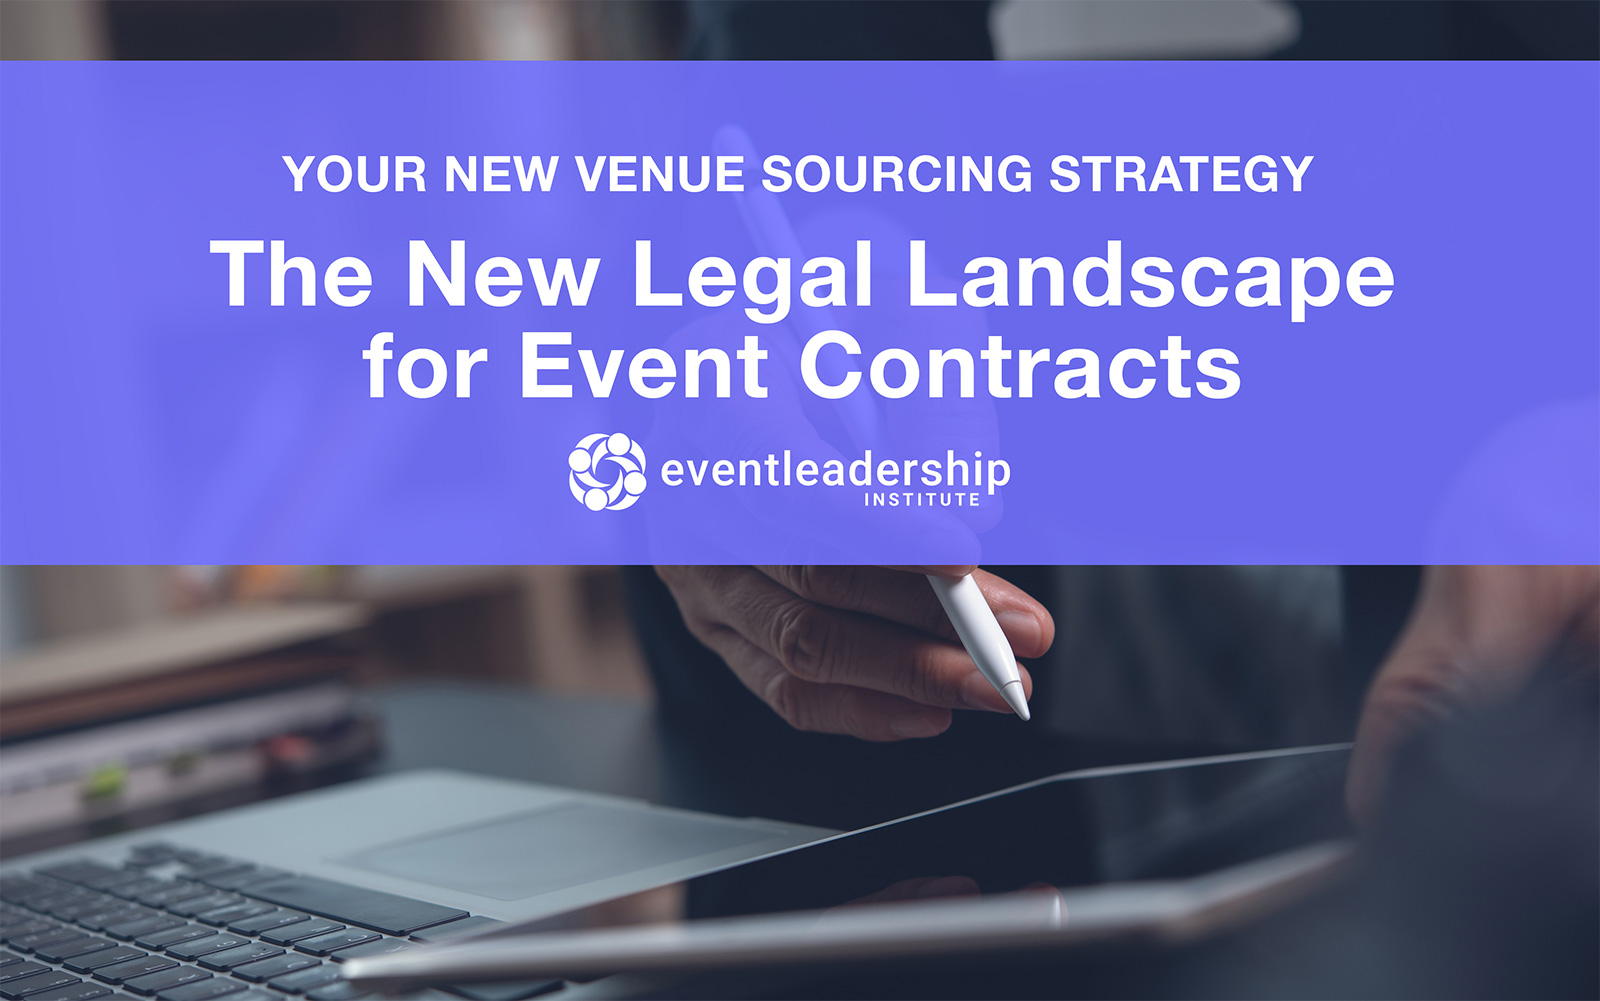 Webinar: Your New Venue Sourcing Strategy: The New Legal Landscape for Event Contracts (Recorded July 14, 2021)